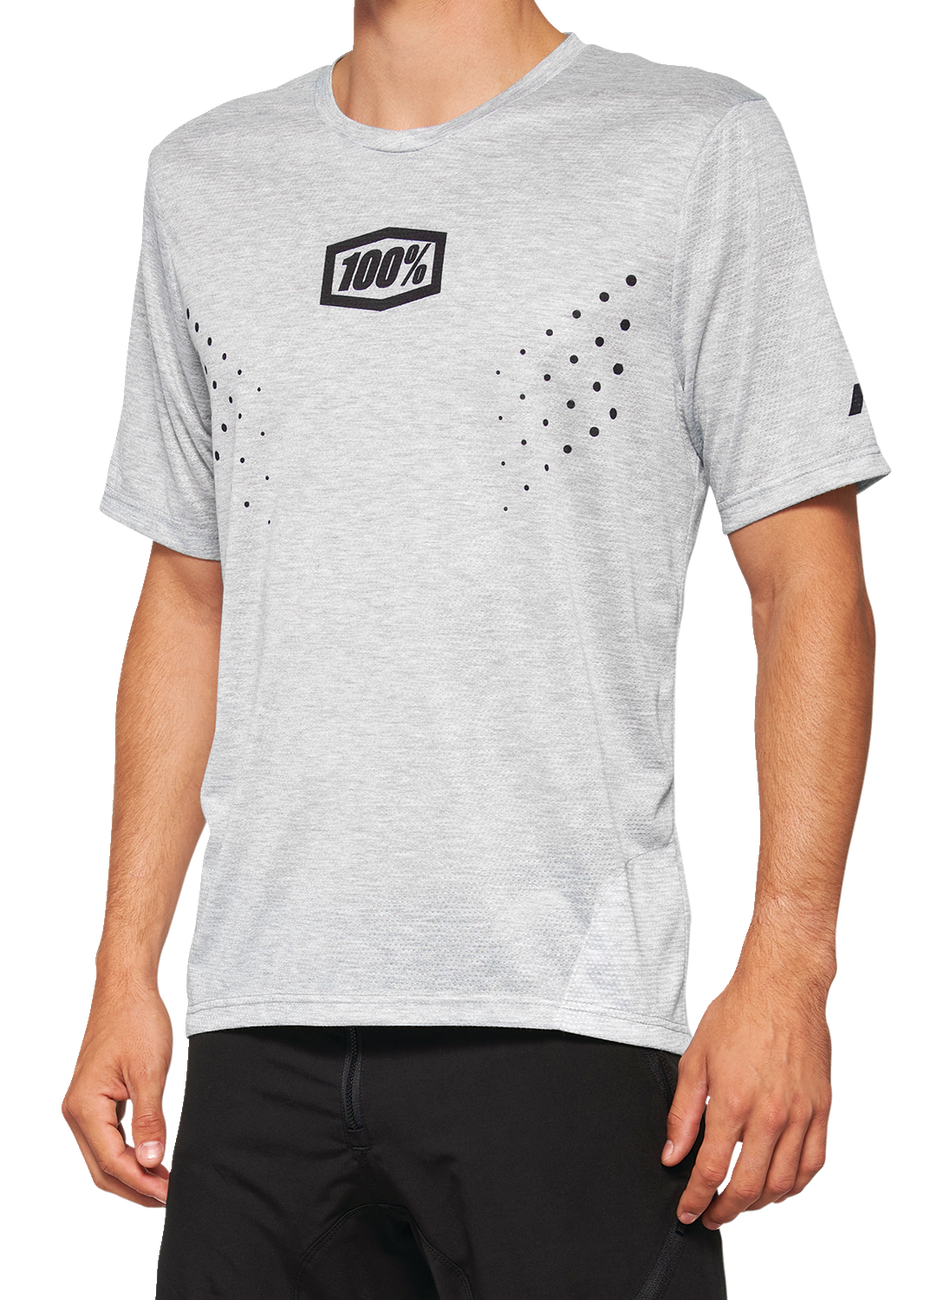 100% Airmatic Mesh Jersey - Short-Sleeve - Gray - Large 40016-00007